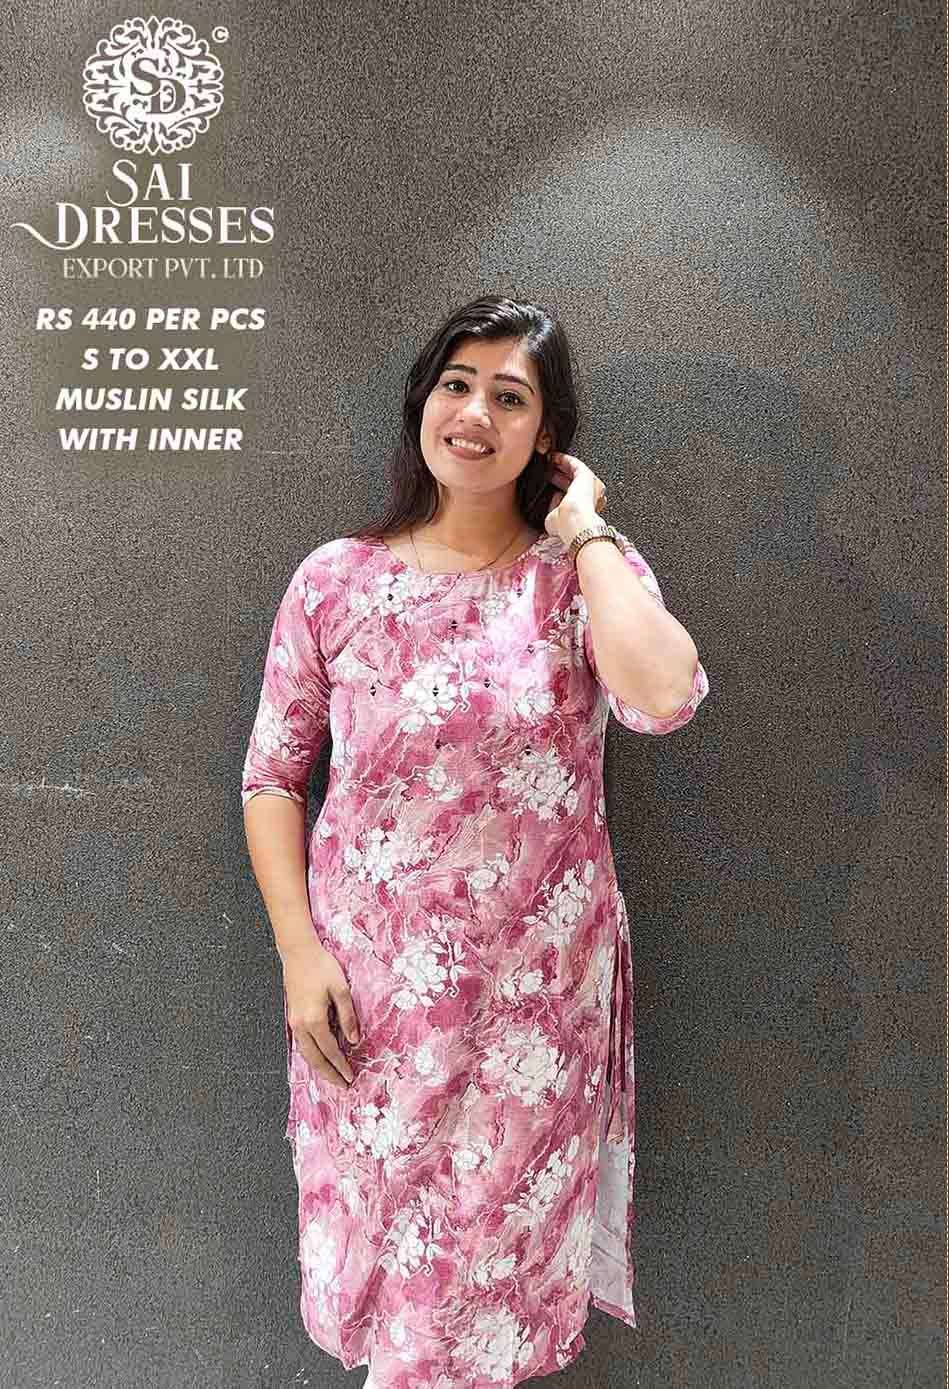 SAI DRESSES PRESENT D.NO SD48 READY TO WEAR DIGITAL PRINTED KURTI COMBO COLLECTION IN WHOLESALE RATE IN SURAT